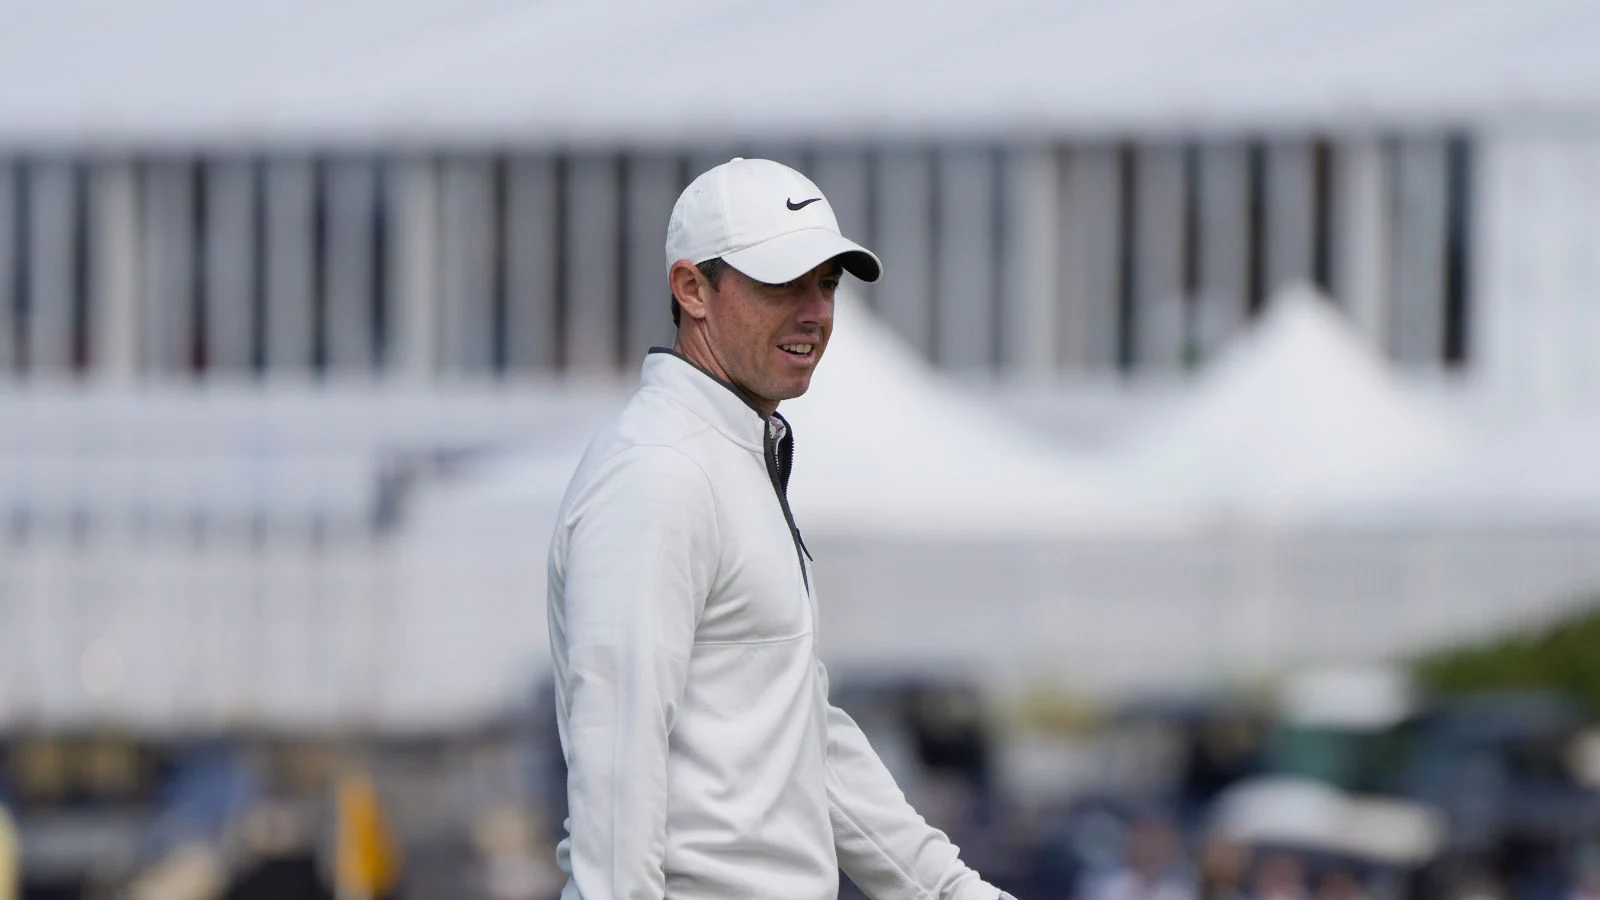 St Andrews Hosts 150th British Open with Rory McIlroy Chasing ‘Holy Grail’